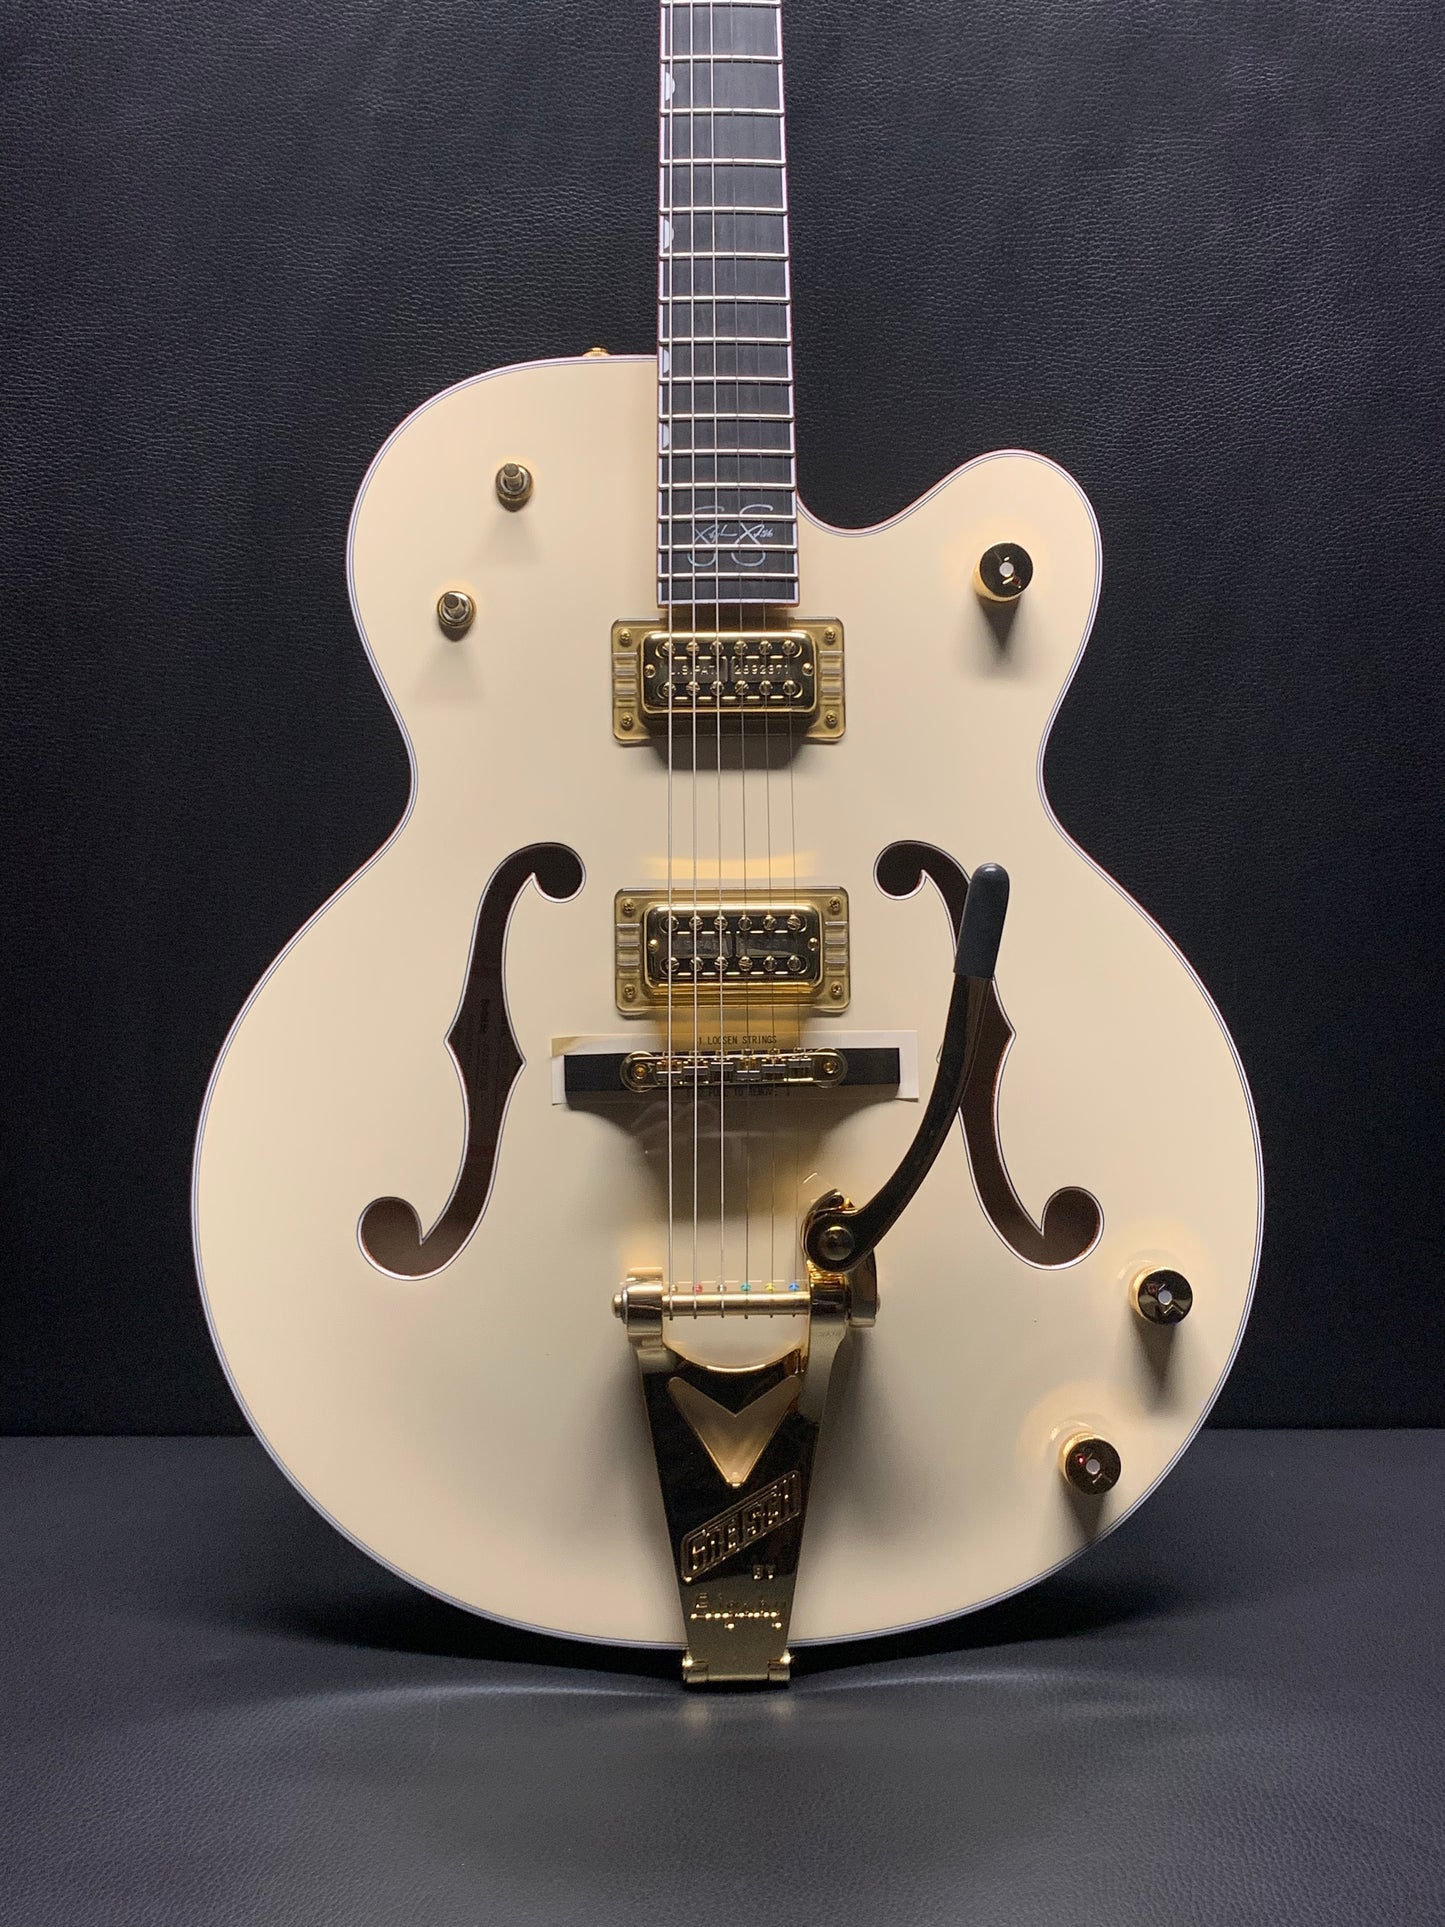 Gretsch Stephen Stills Signature Falcon Hollow Body With Bigsby G6136-1958